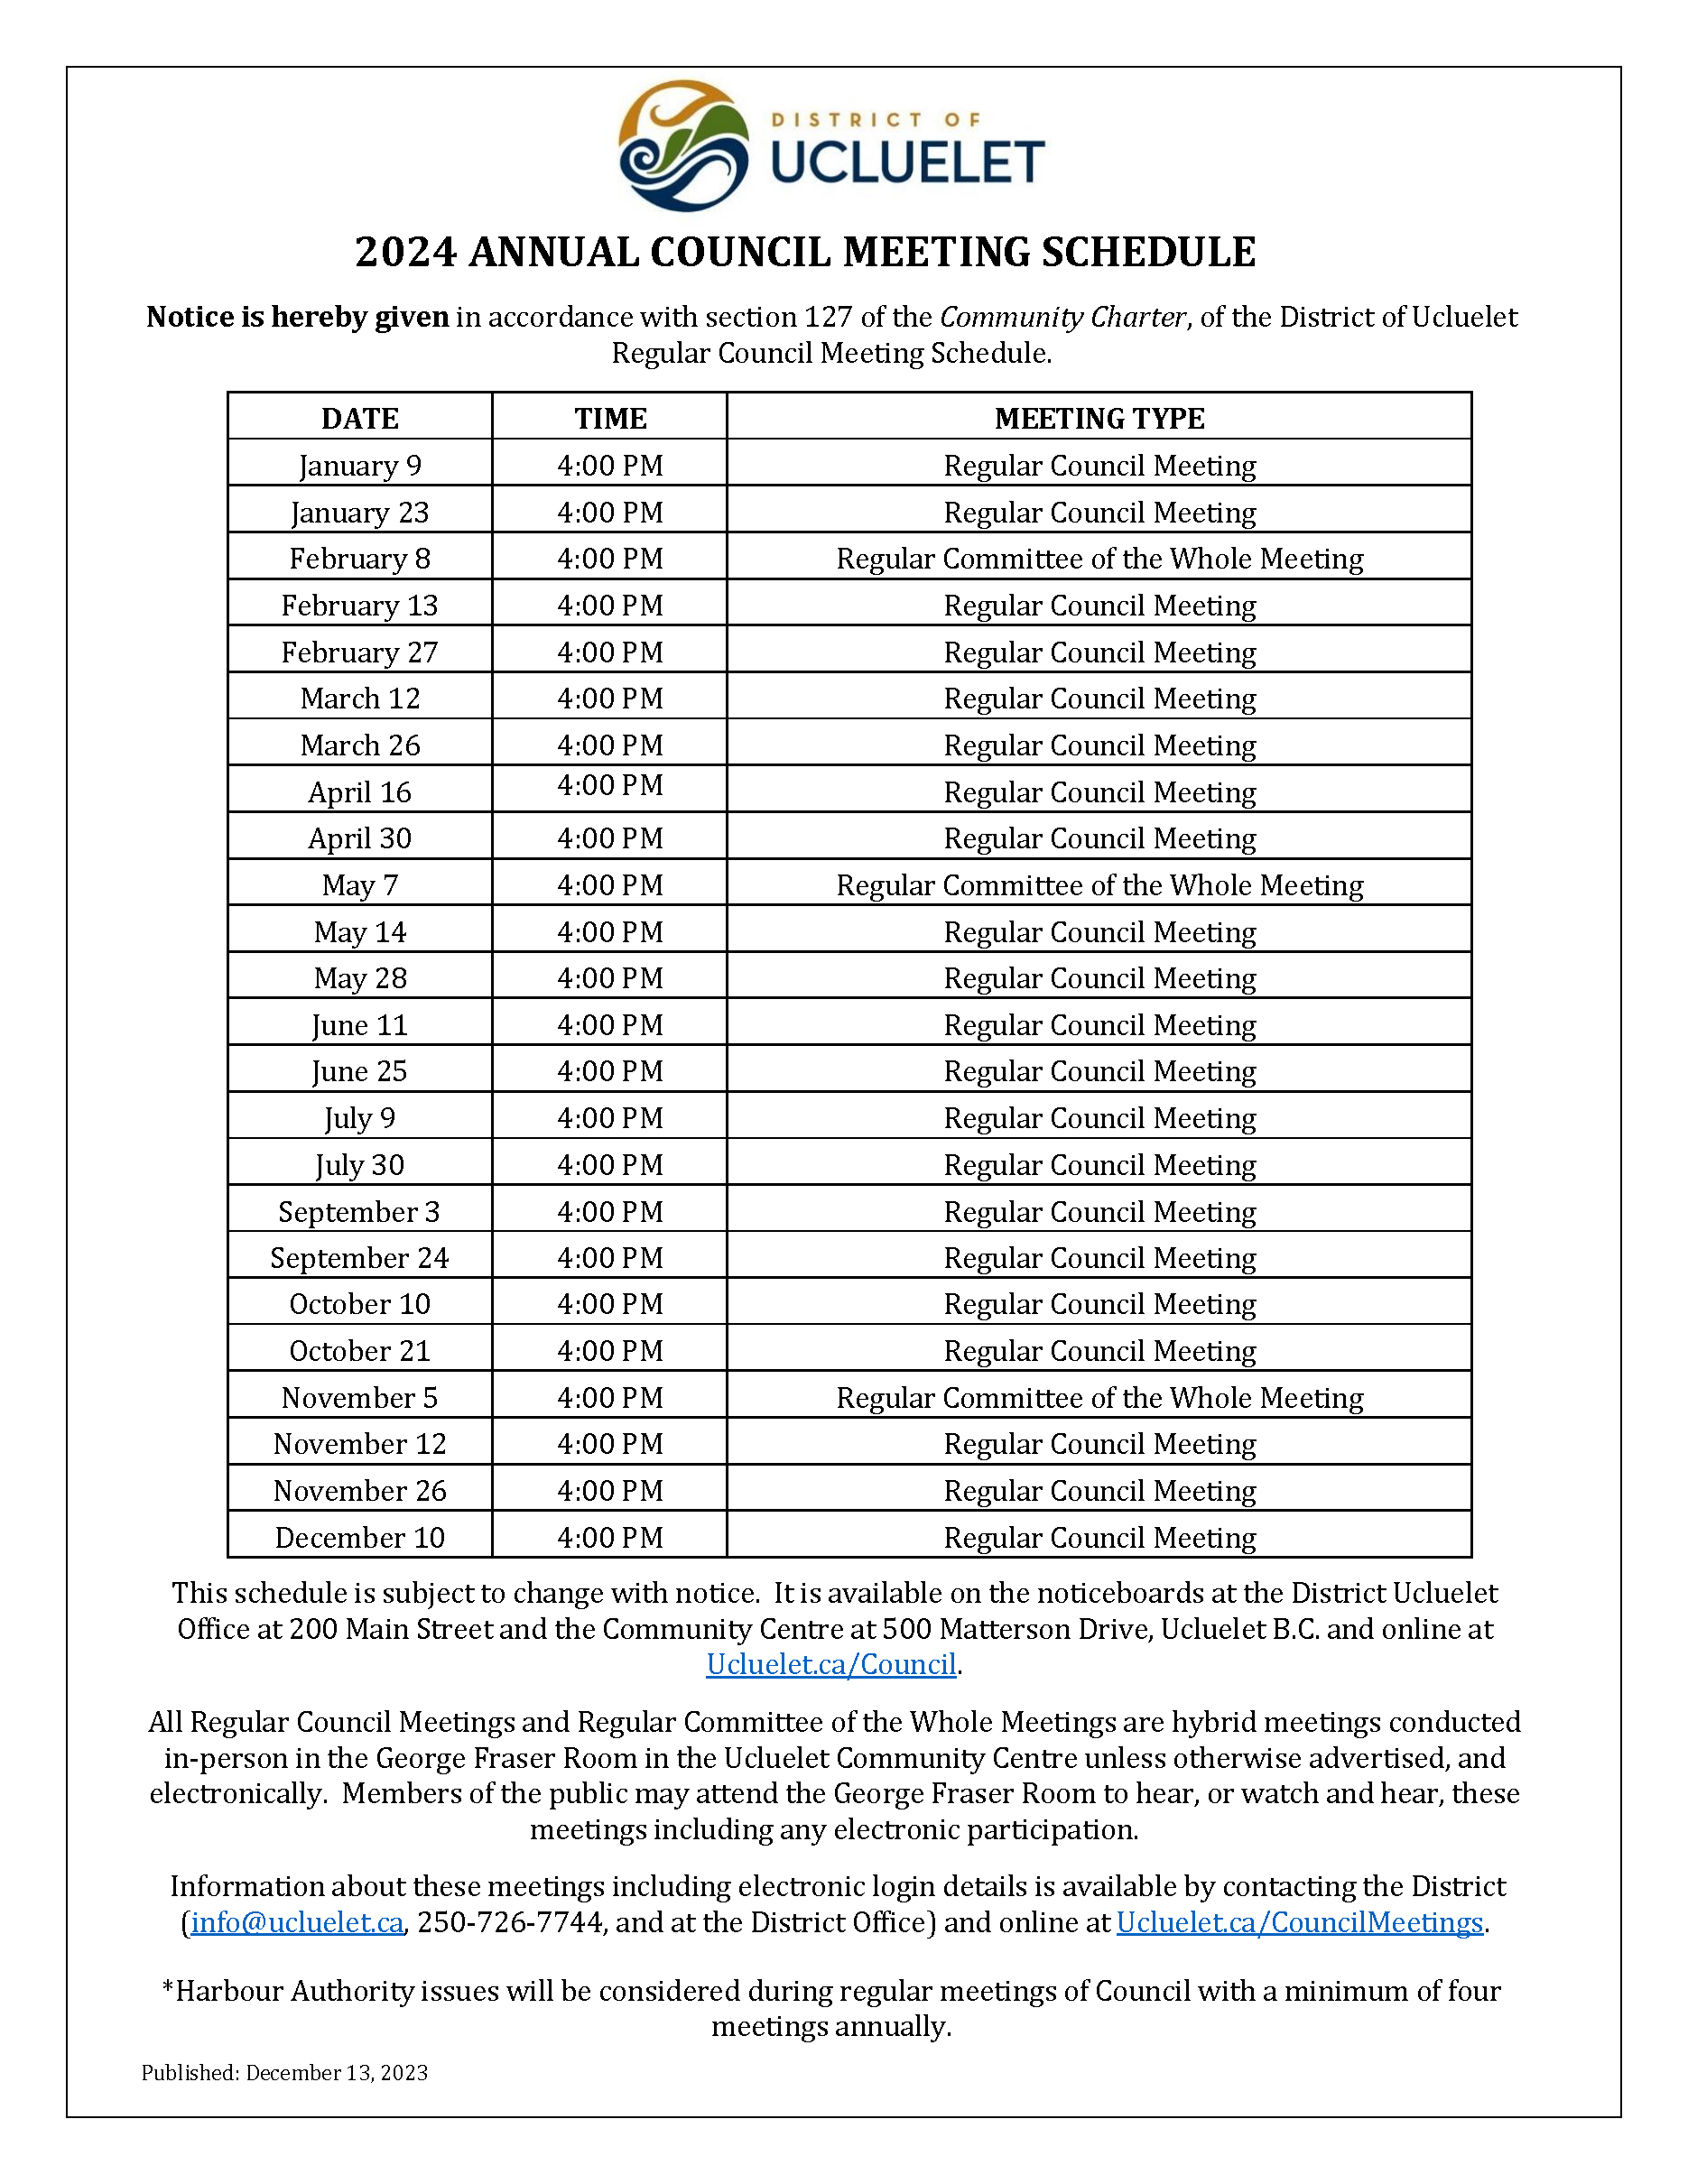 2024_Annual_Council_Schedule_-_Ad___Revised.png